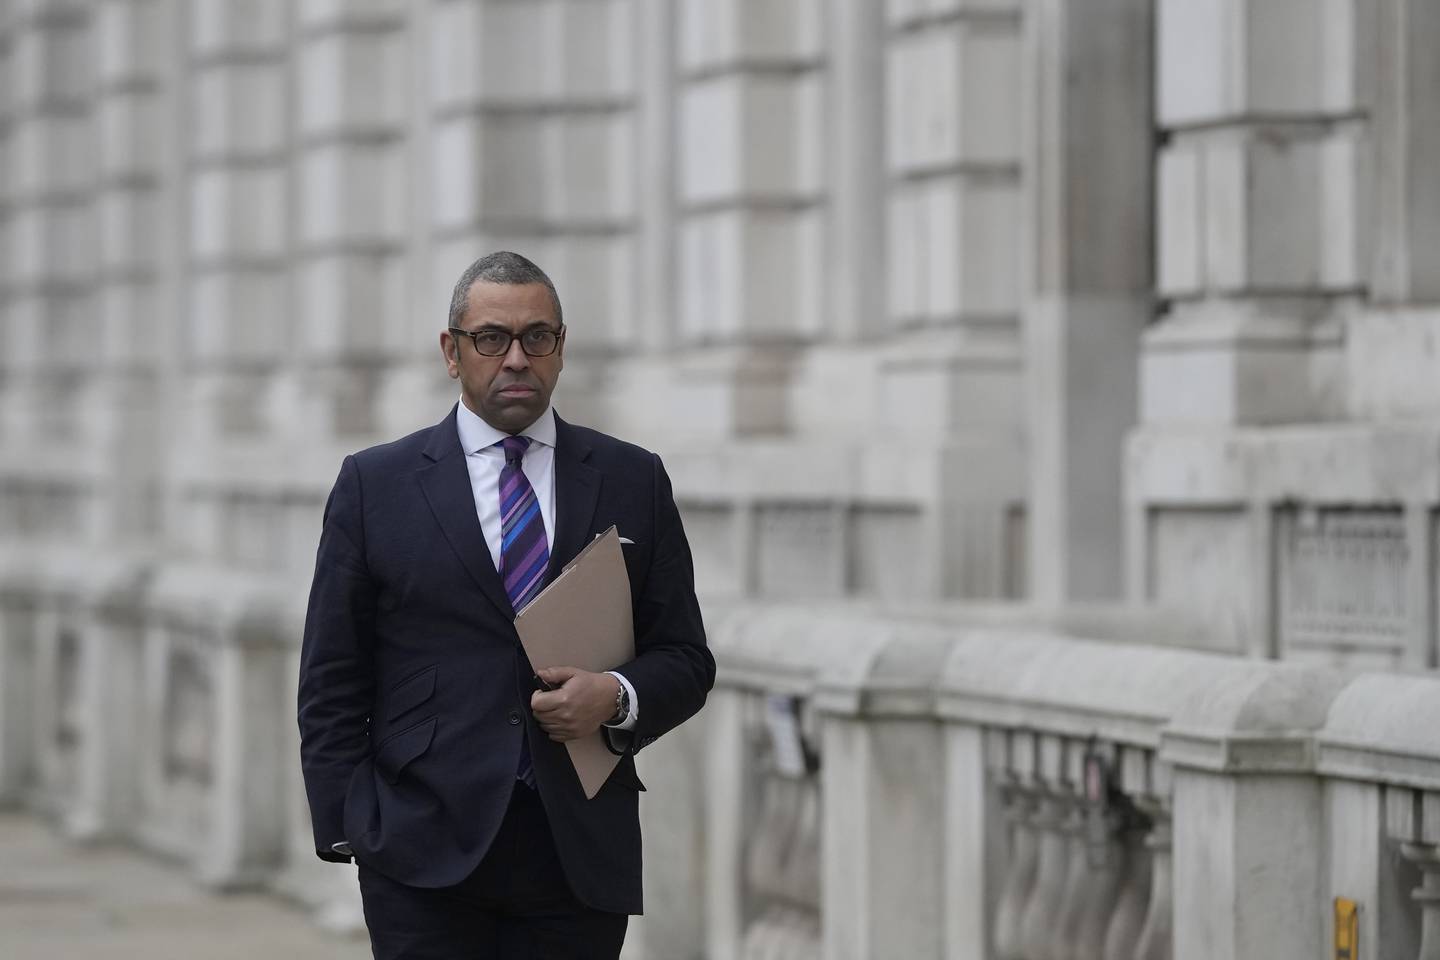 James Cleverly arrives for a cabinet meeting in London last month. AP Photo